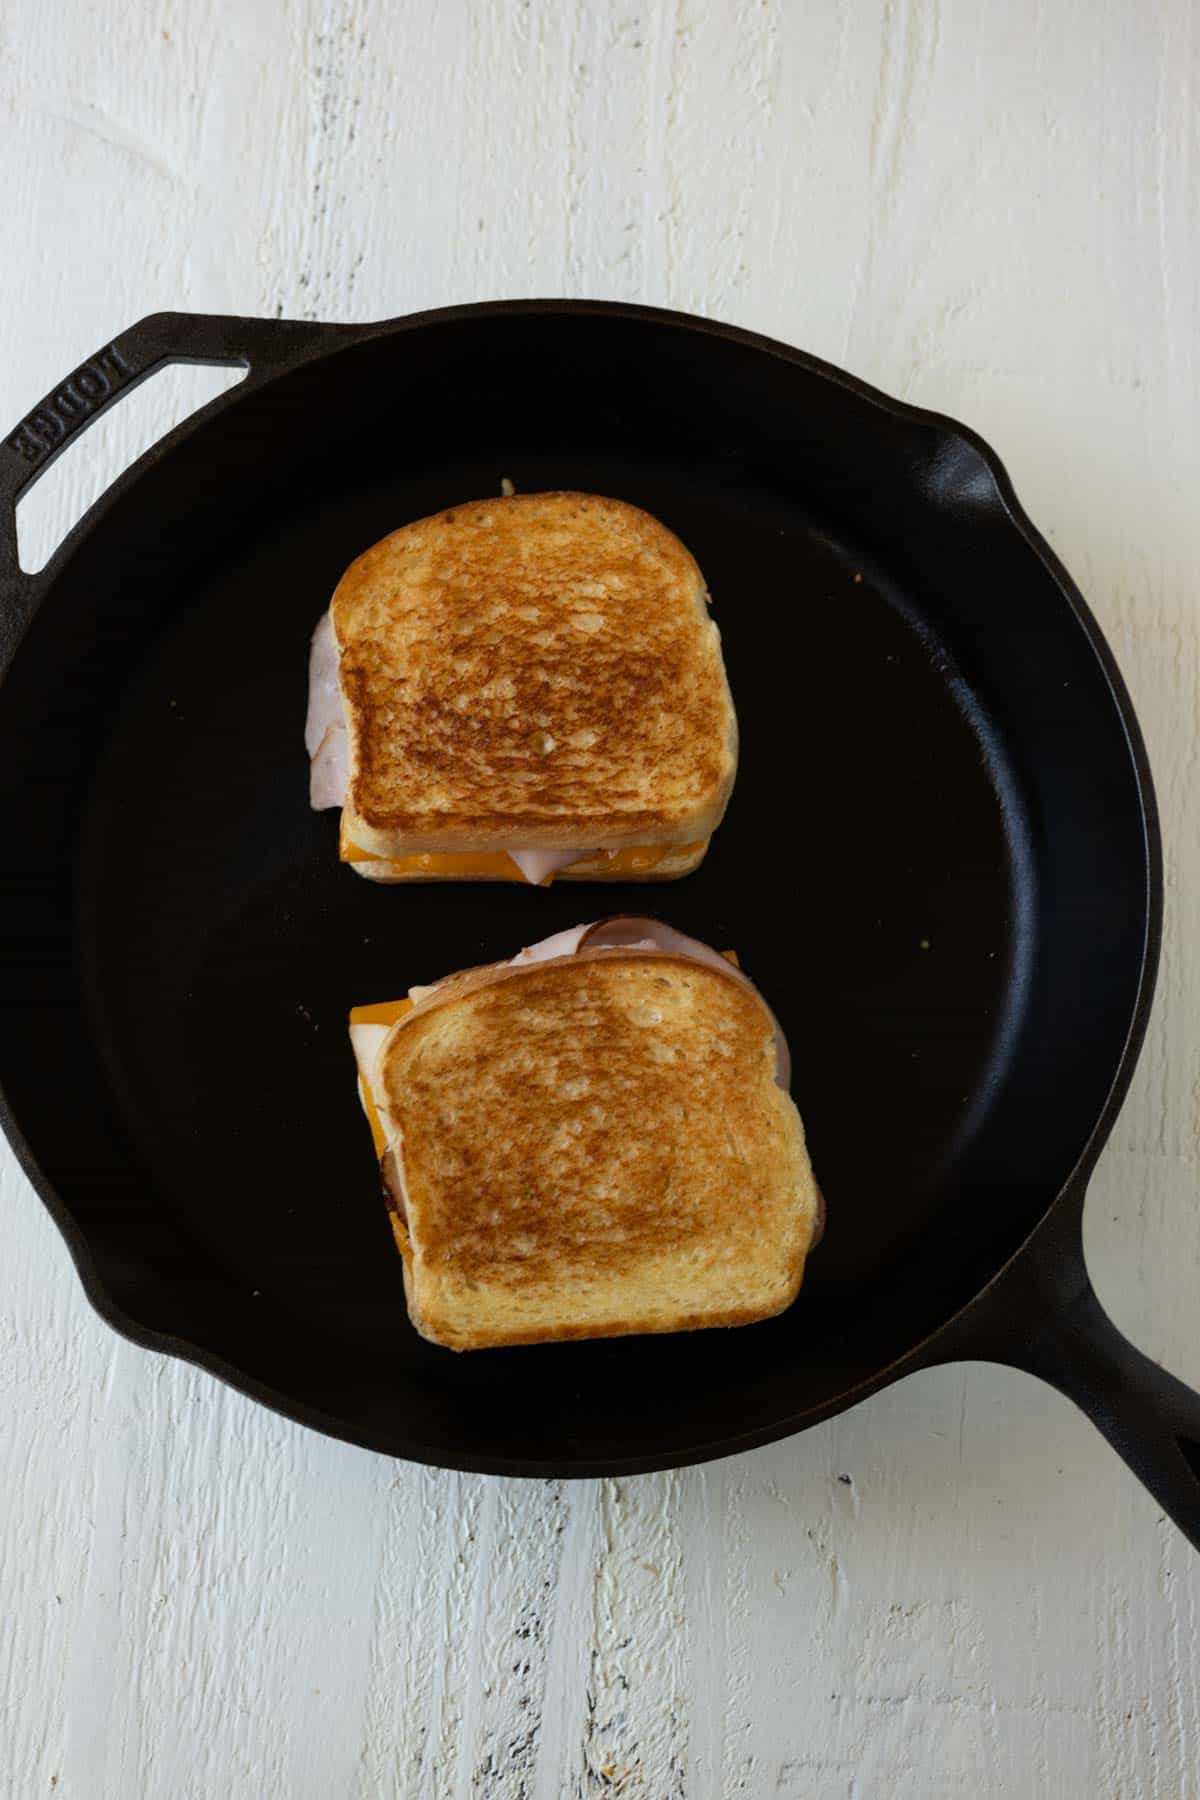 Golden brown grilled cheese sandwiches in a cast iron skillet.